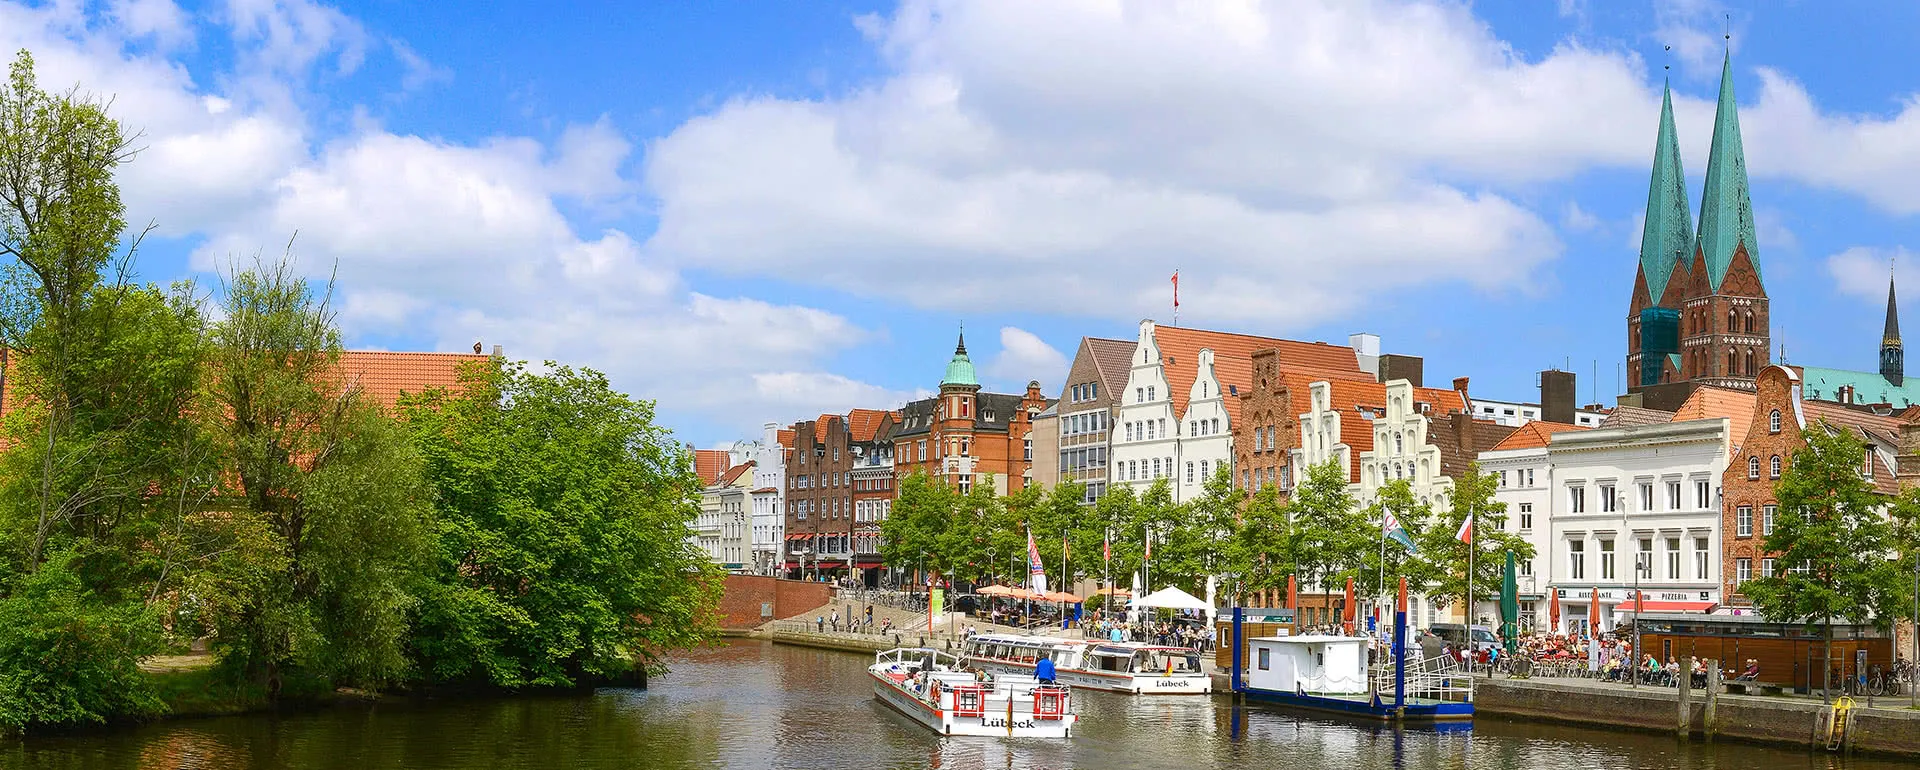 Luebeck - the destination with youth hostels